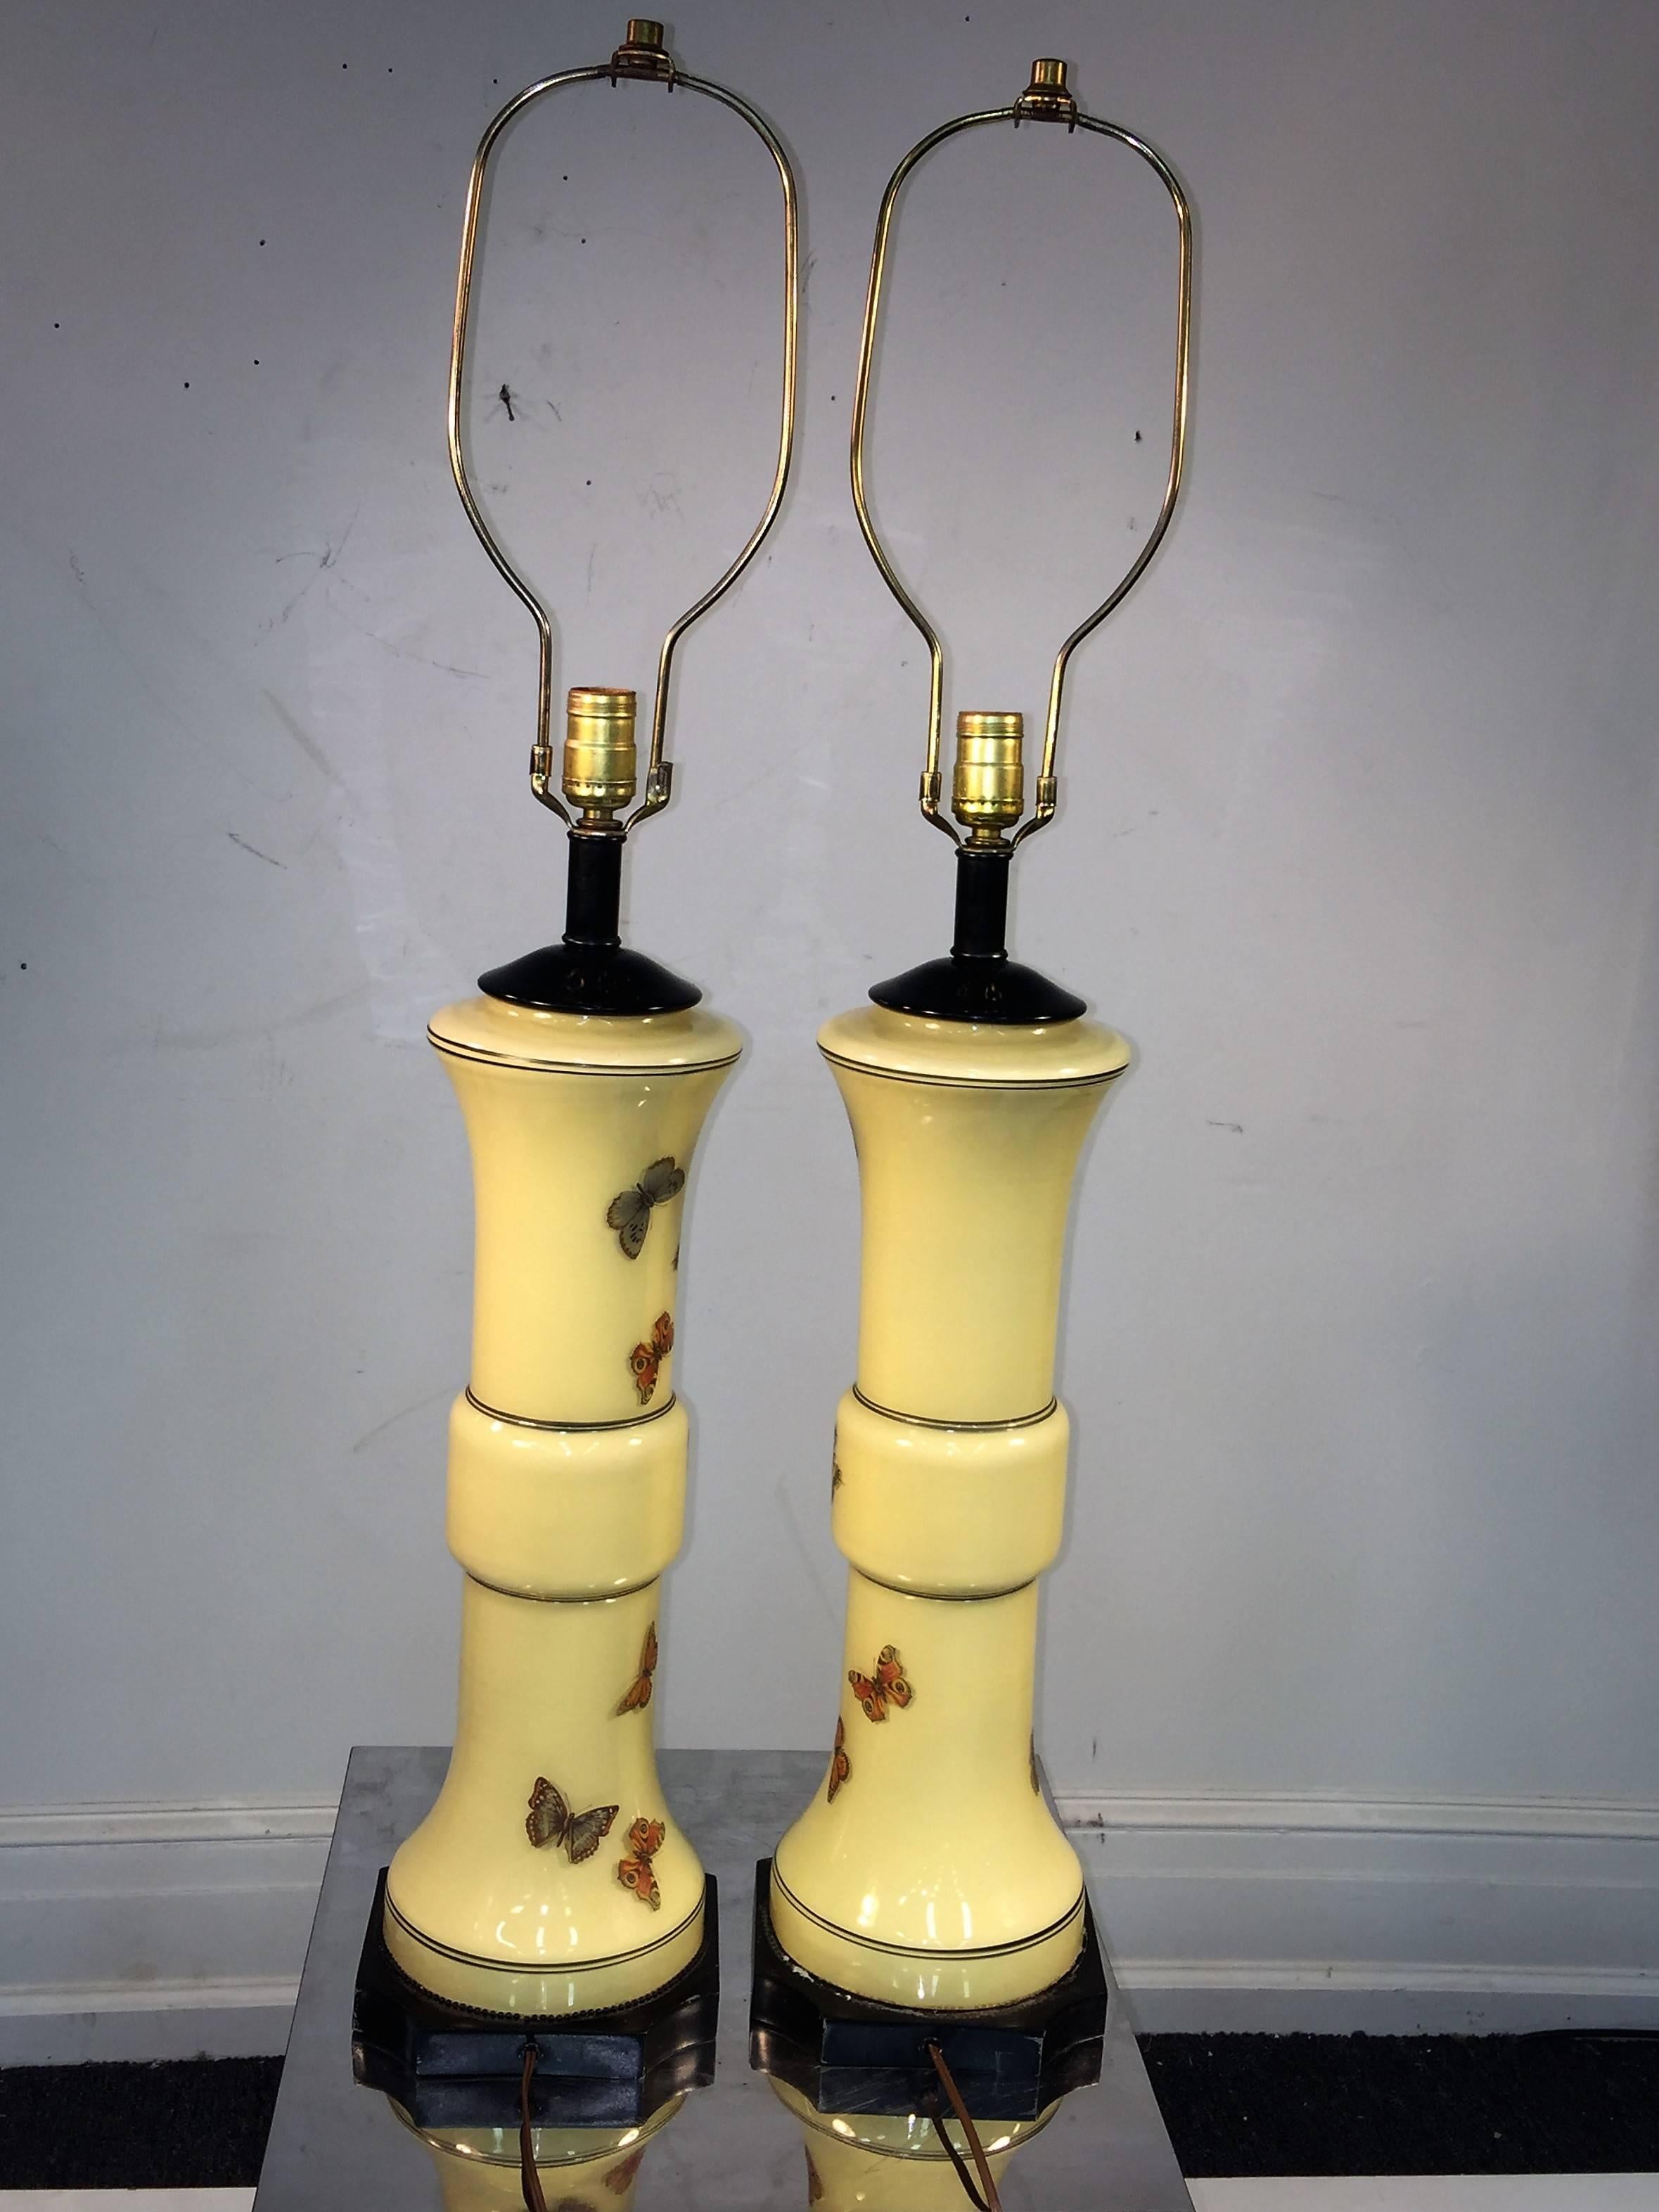 Marvelous Pair of Fornasetti Style Enameled Glass Butterfly Lamps For Sale 1